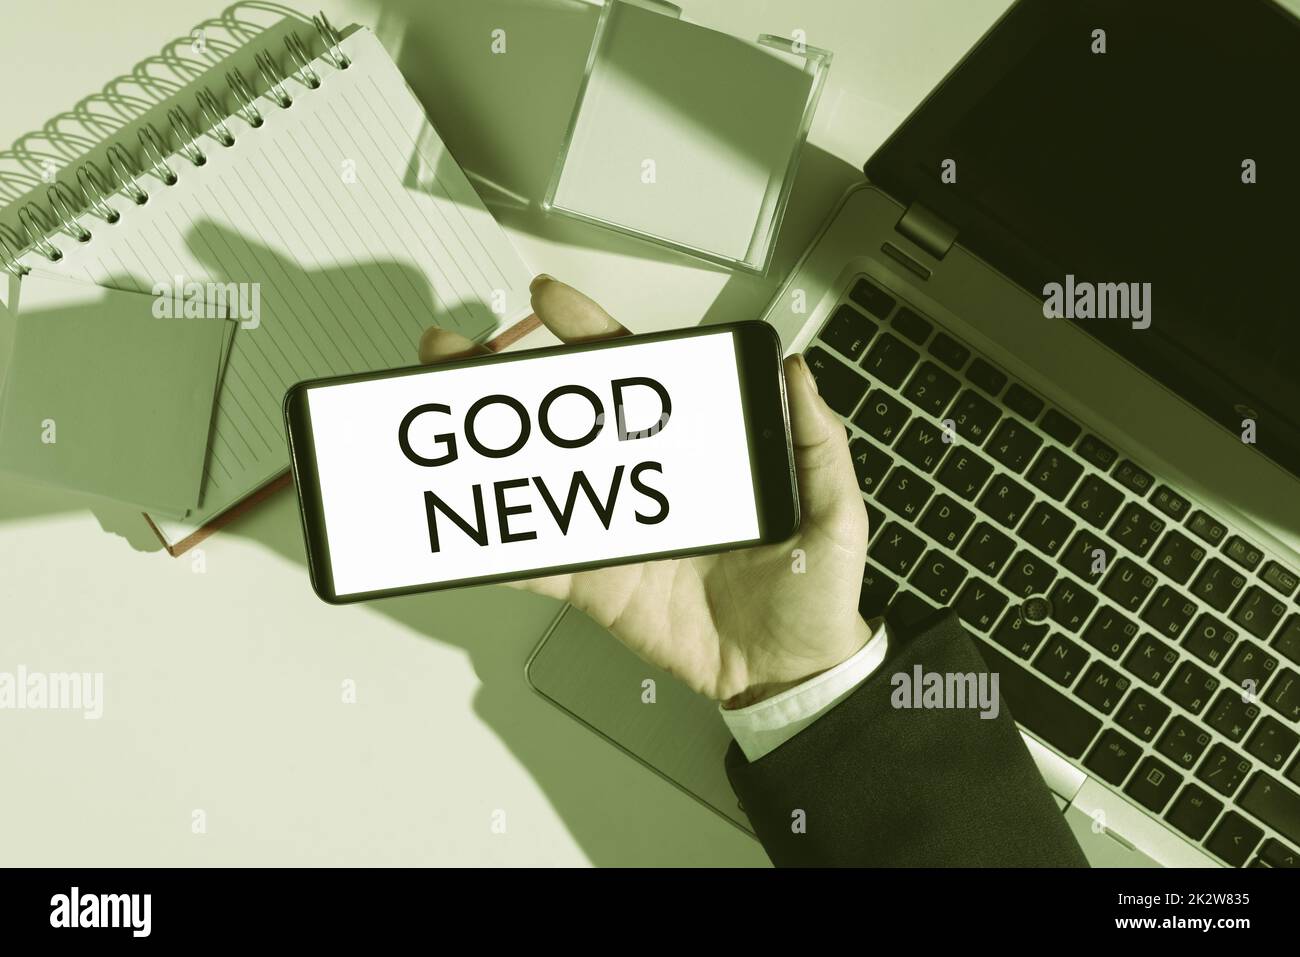 Text showing inspiration Good News. Business approach Someone or something positive,encouraging,uplifting,or desirable -47264 Stock Photo